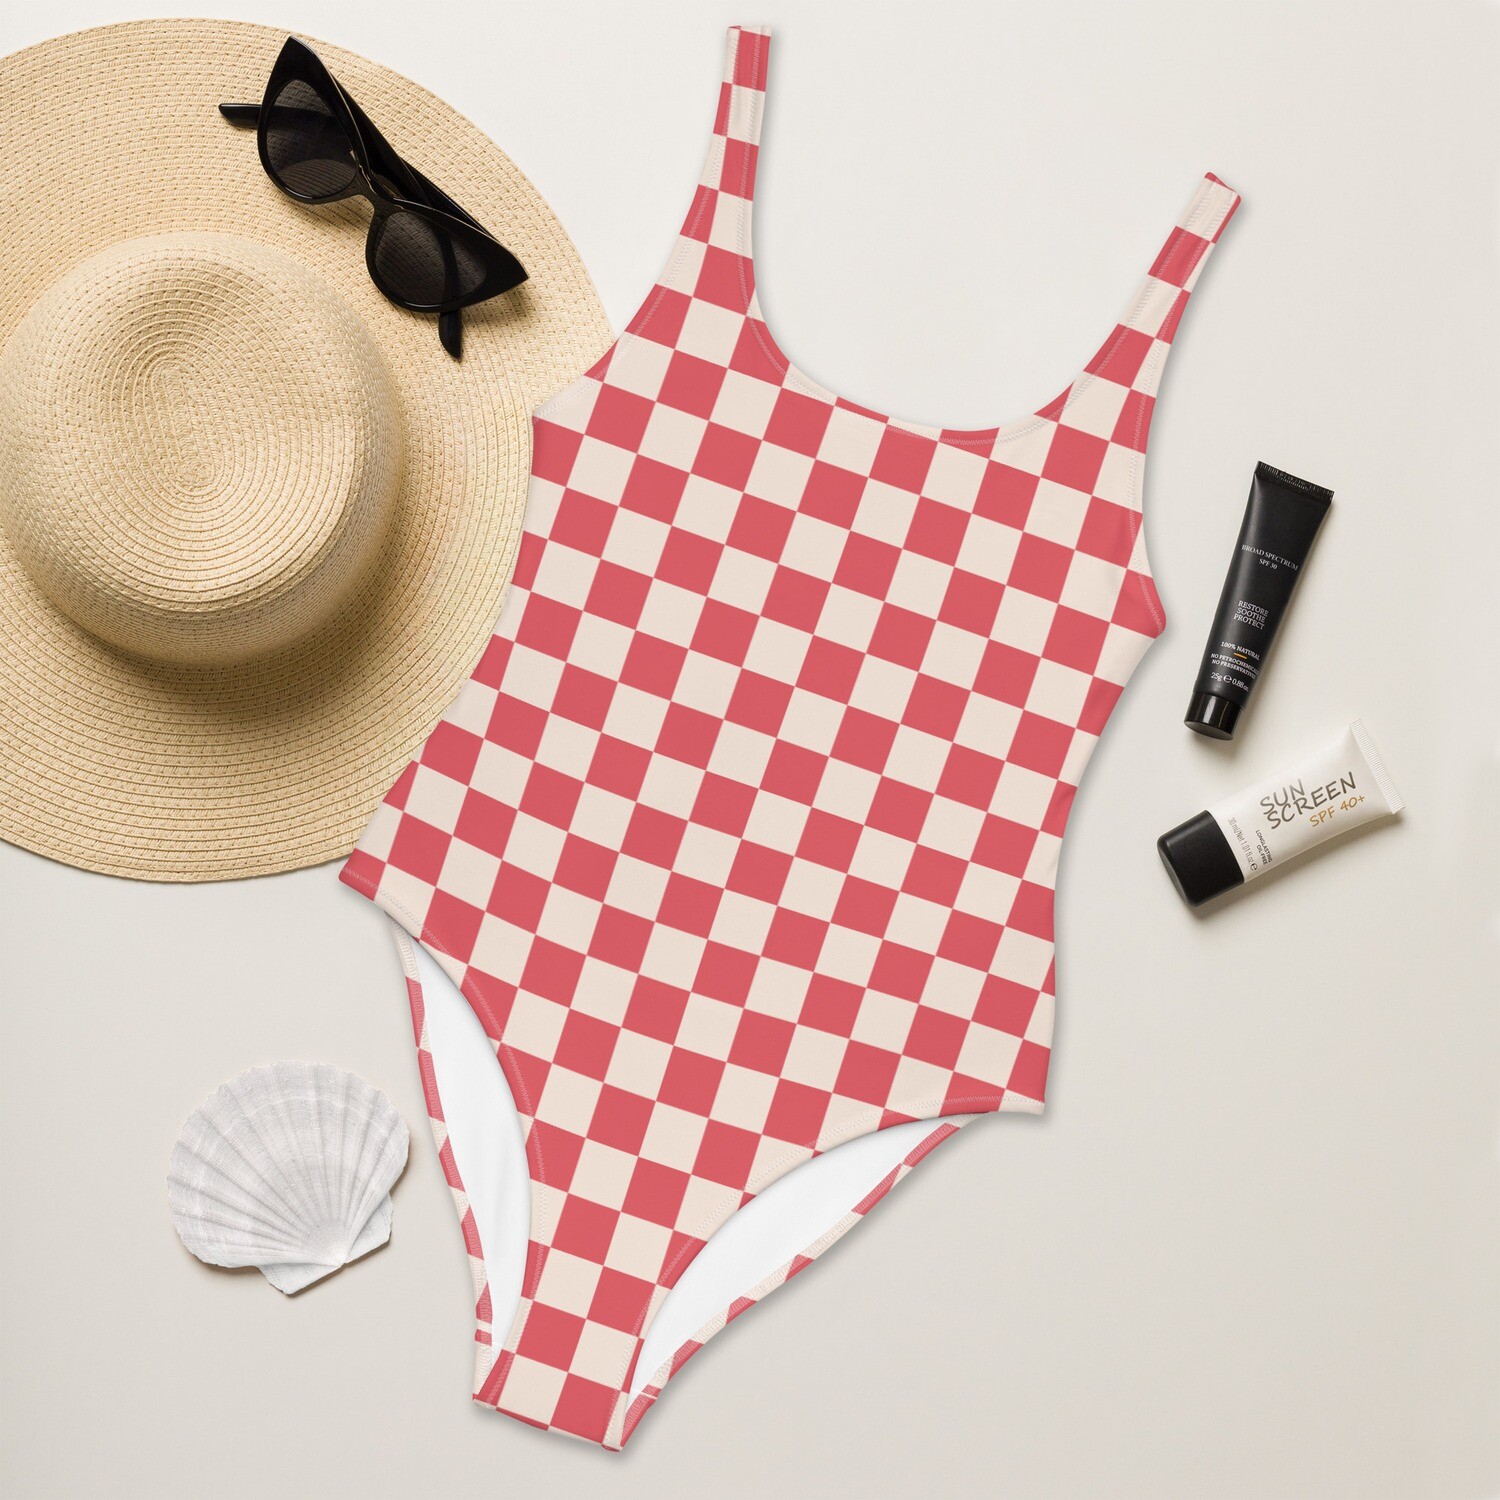 Retro red checkered one-piece swimsuit in sizes XS-3XL